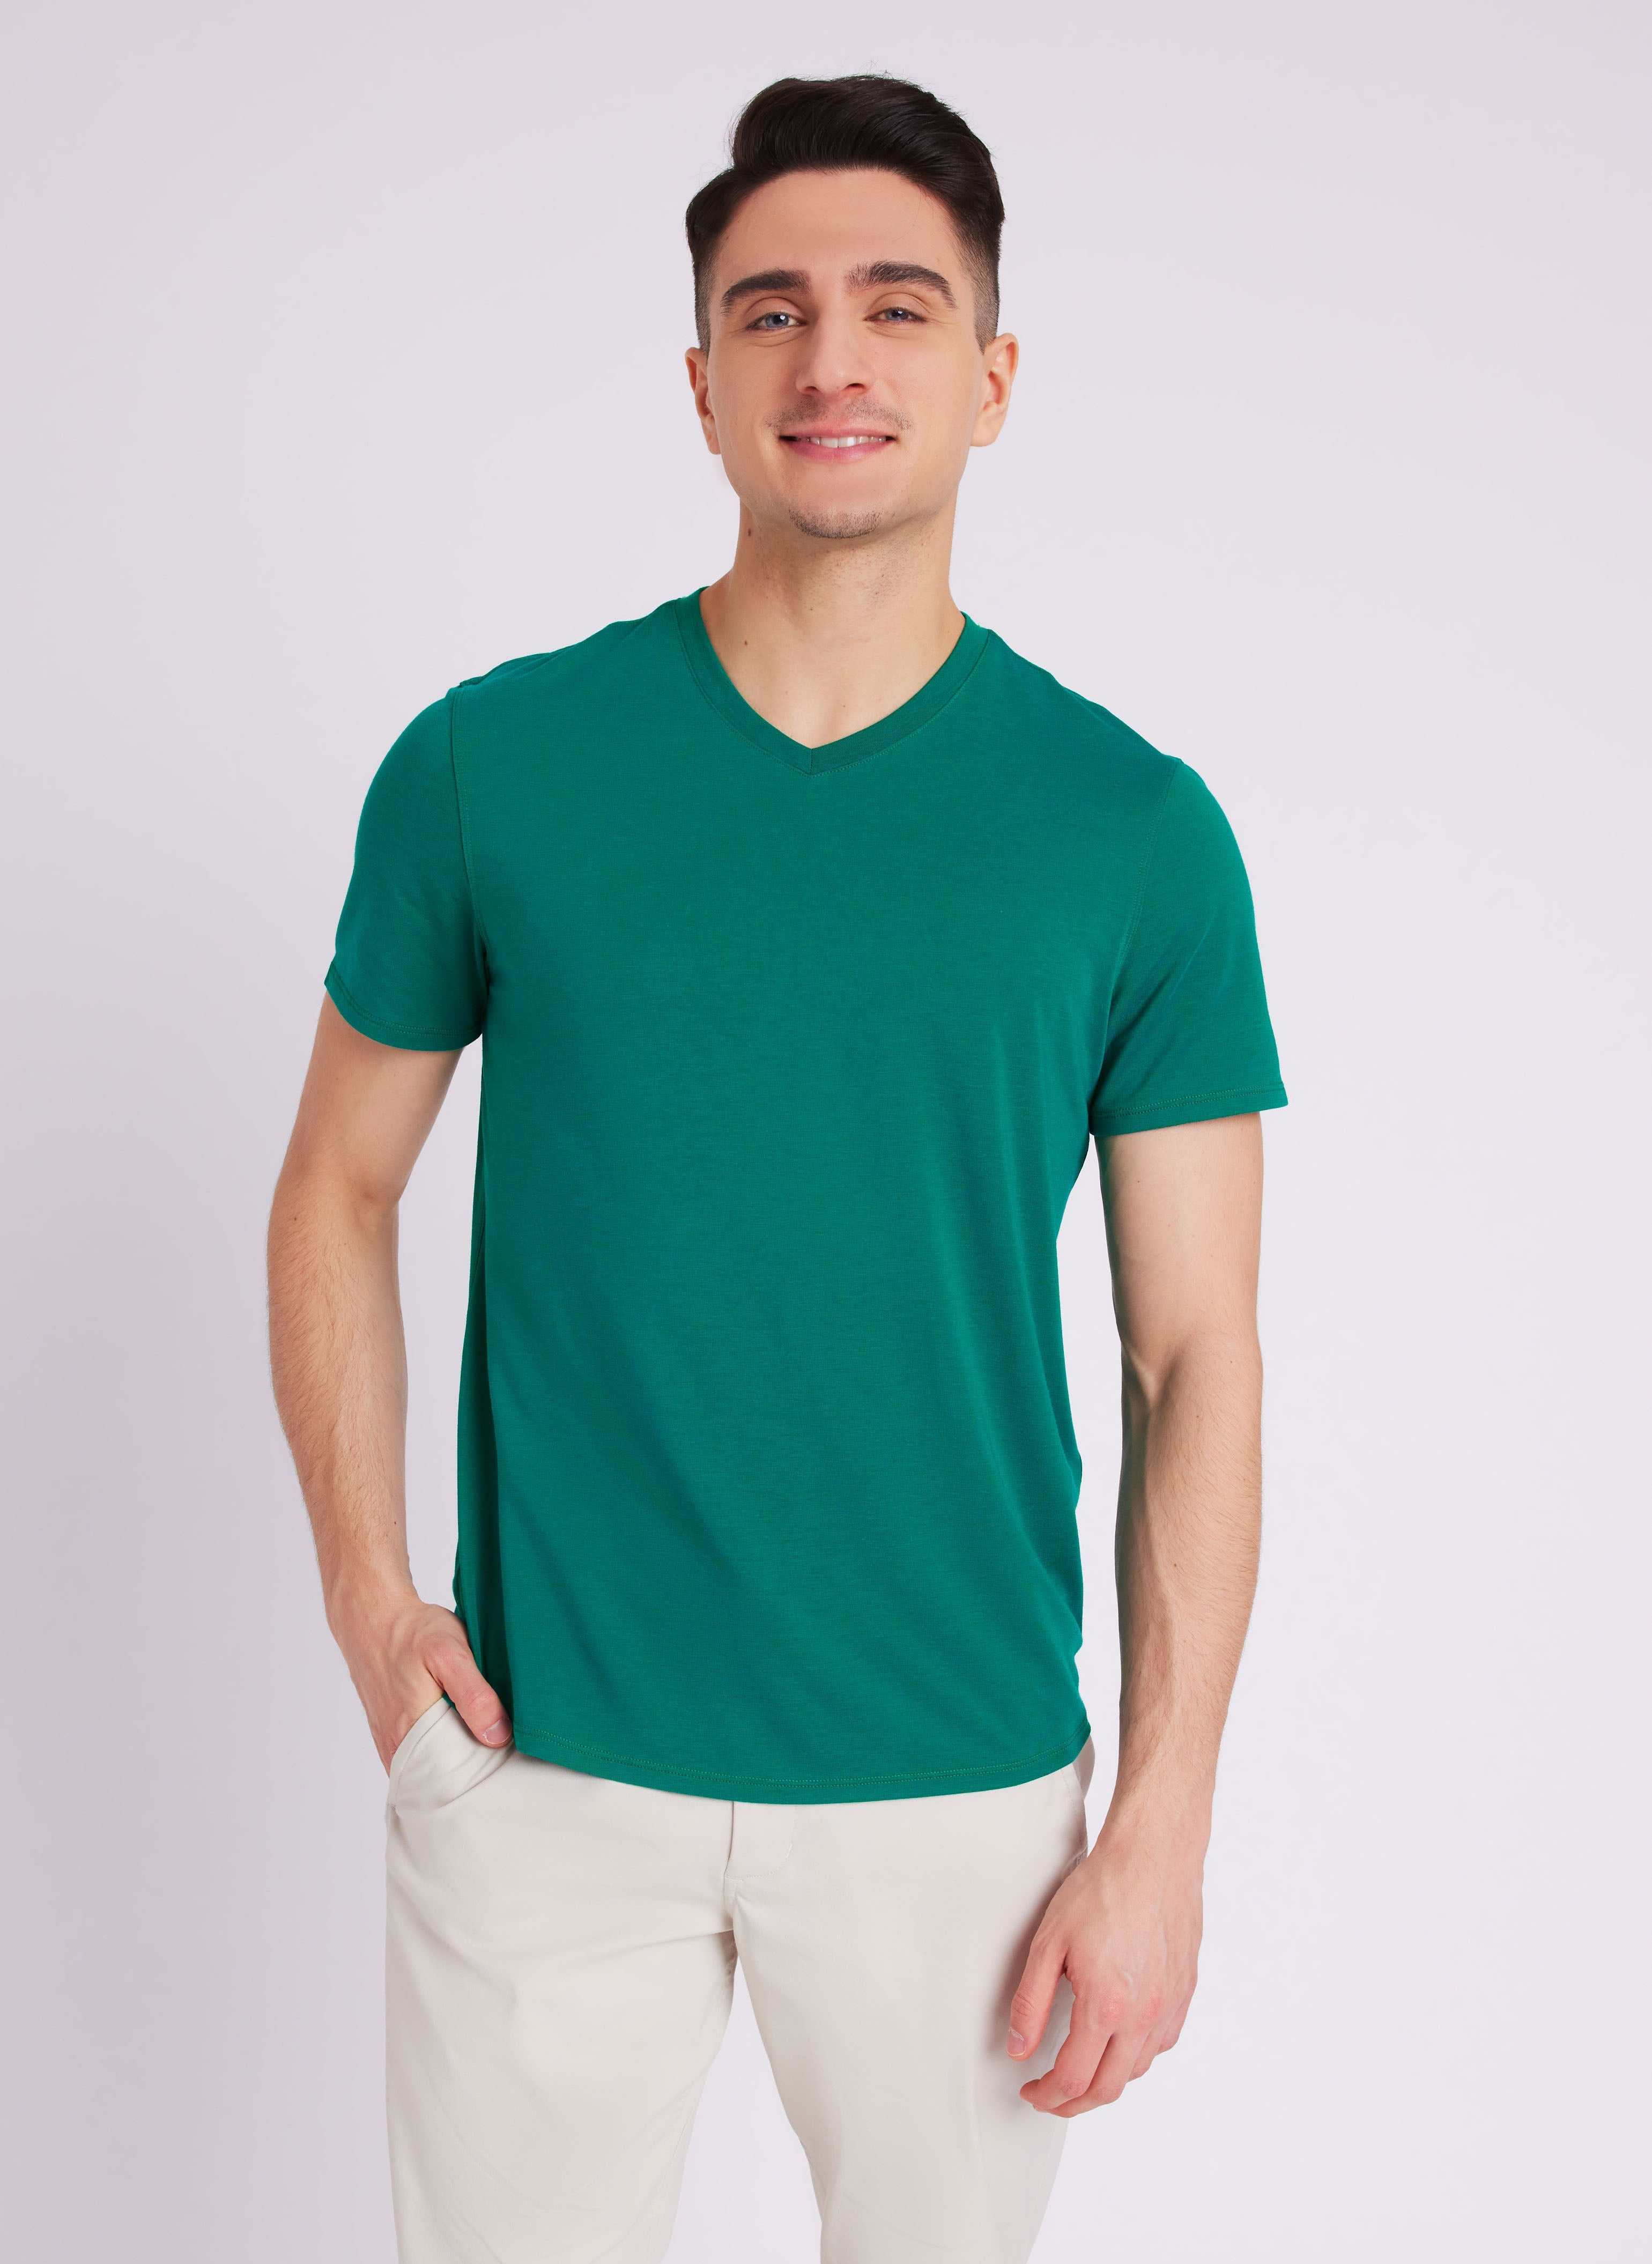 Kit and Ace — Ace V-Neck 3 Pack Tees